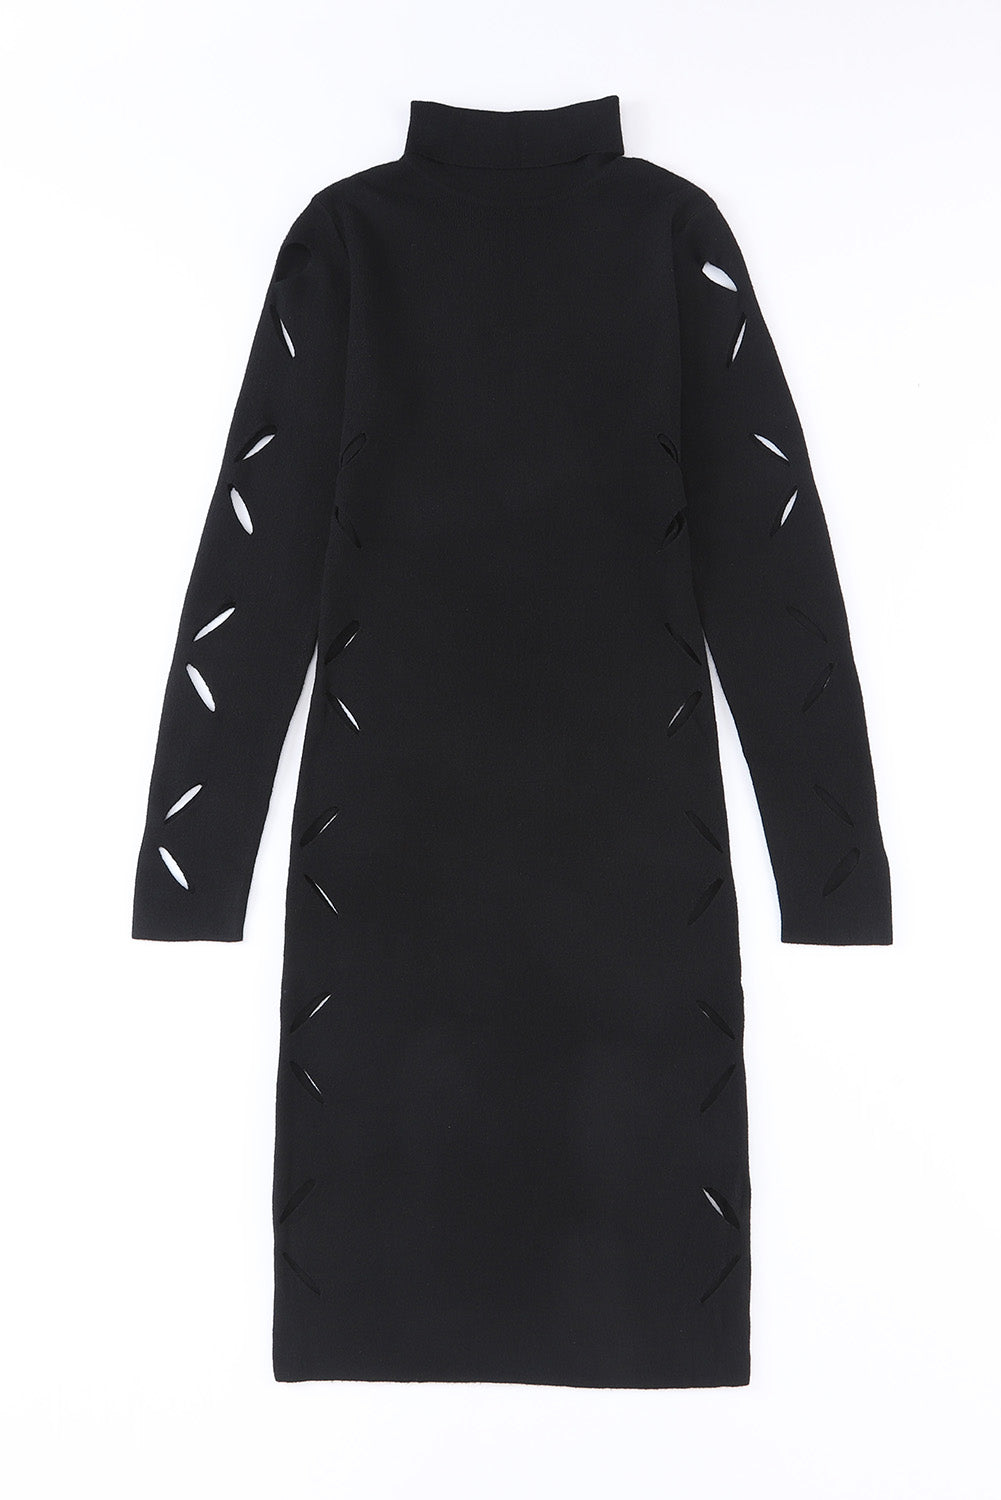 Black Cut Out Long Sleeve Bodycon Sweater Dress